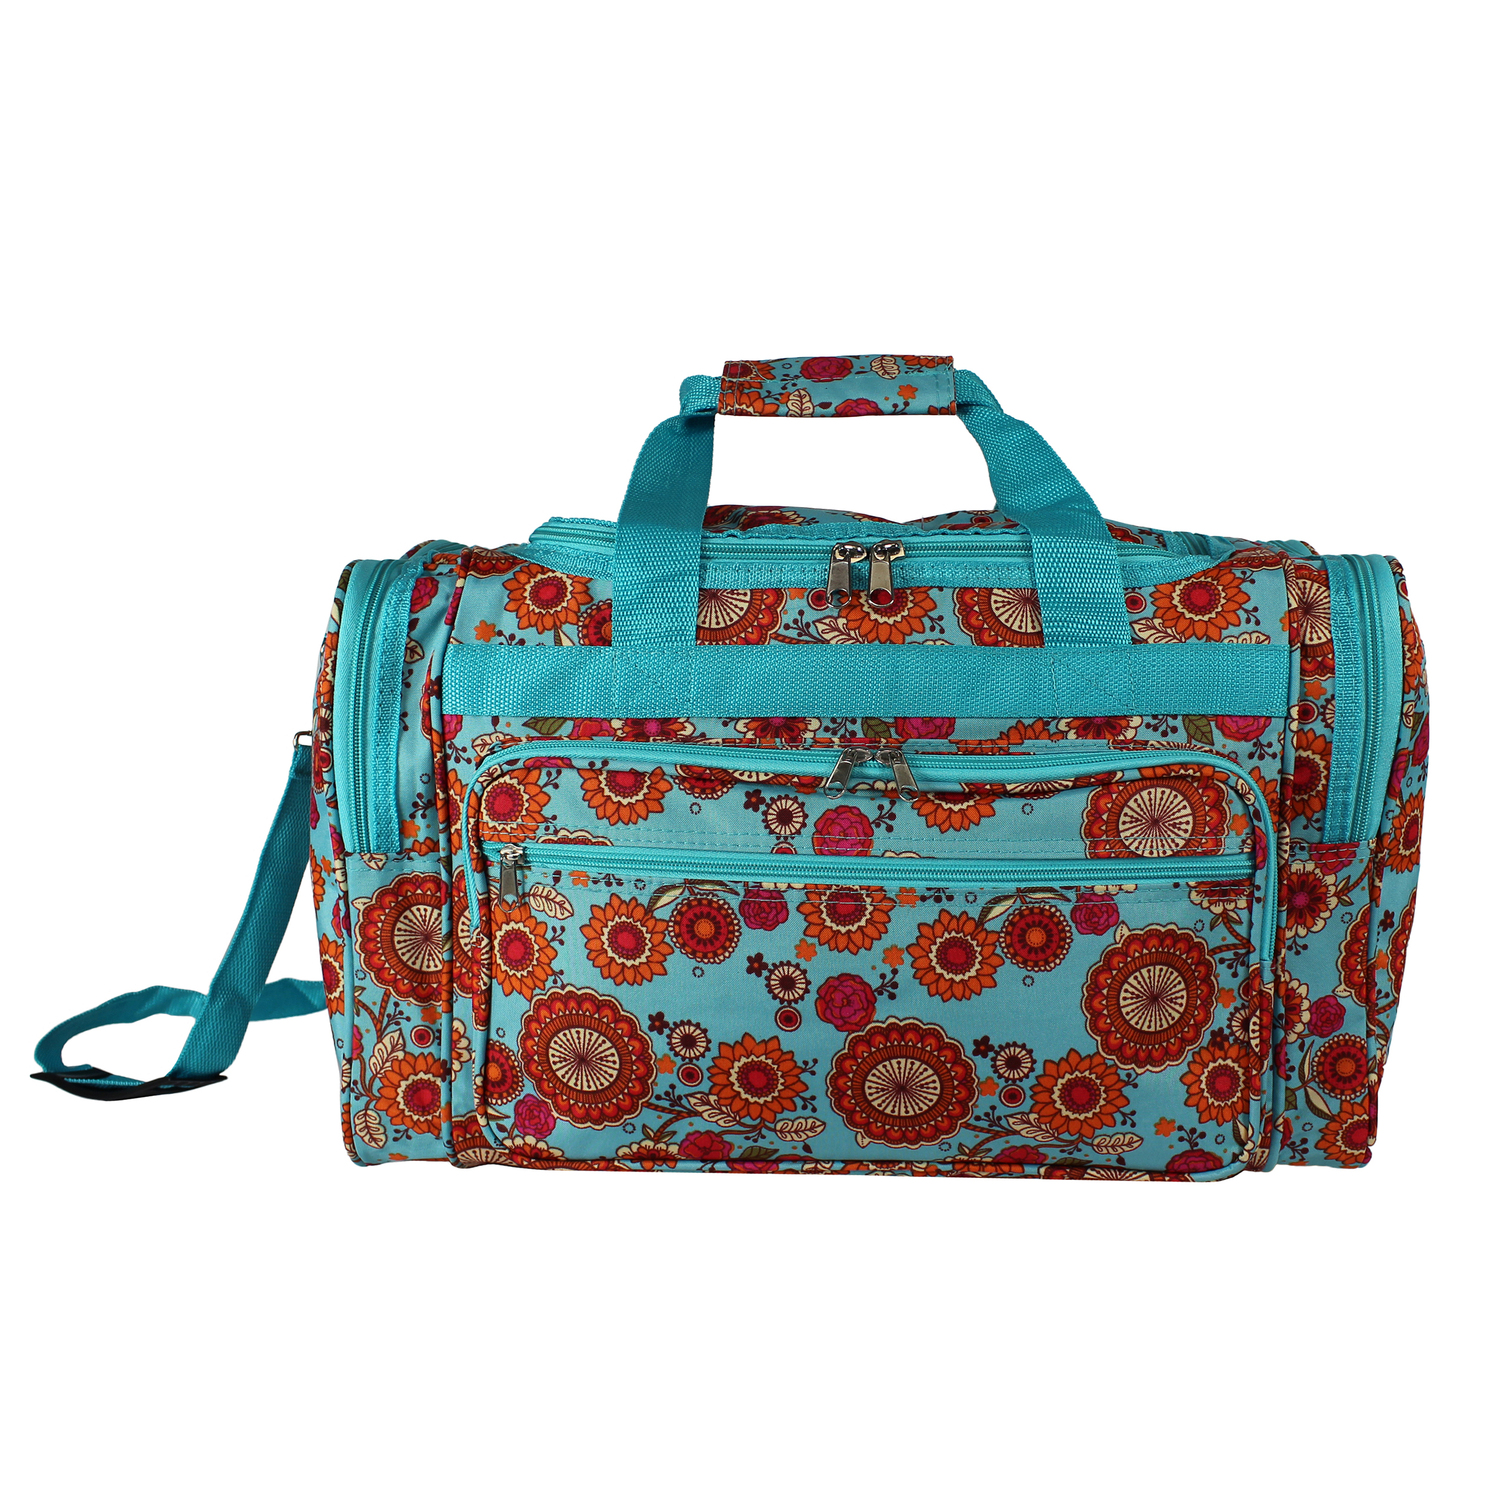 World Traveler 22-Inch Carry-On Duffel Bag - Wildflowers - image 1 of 2